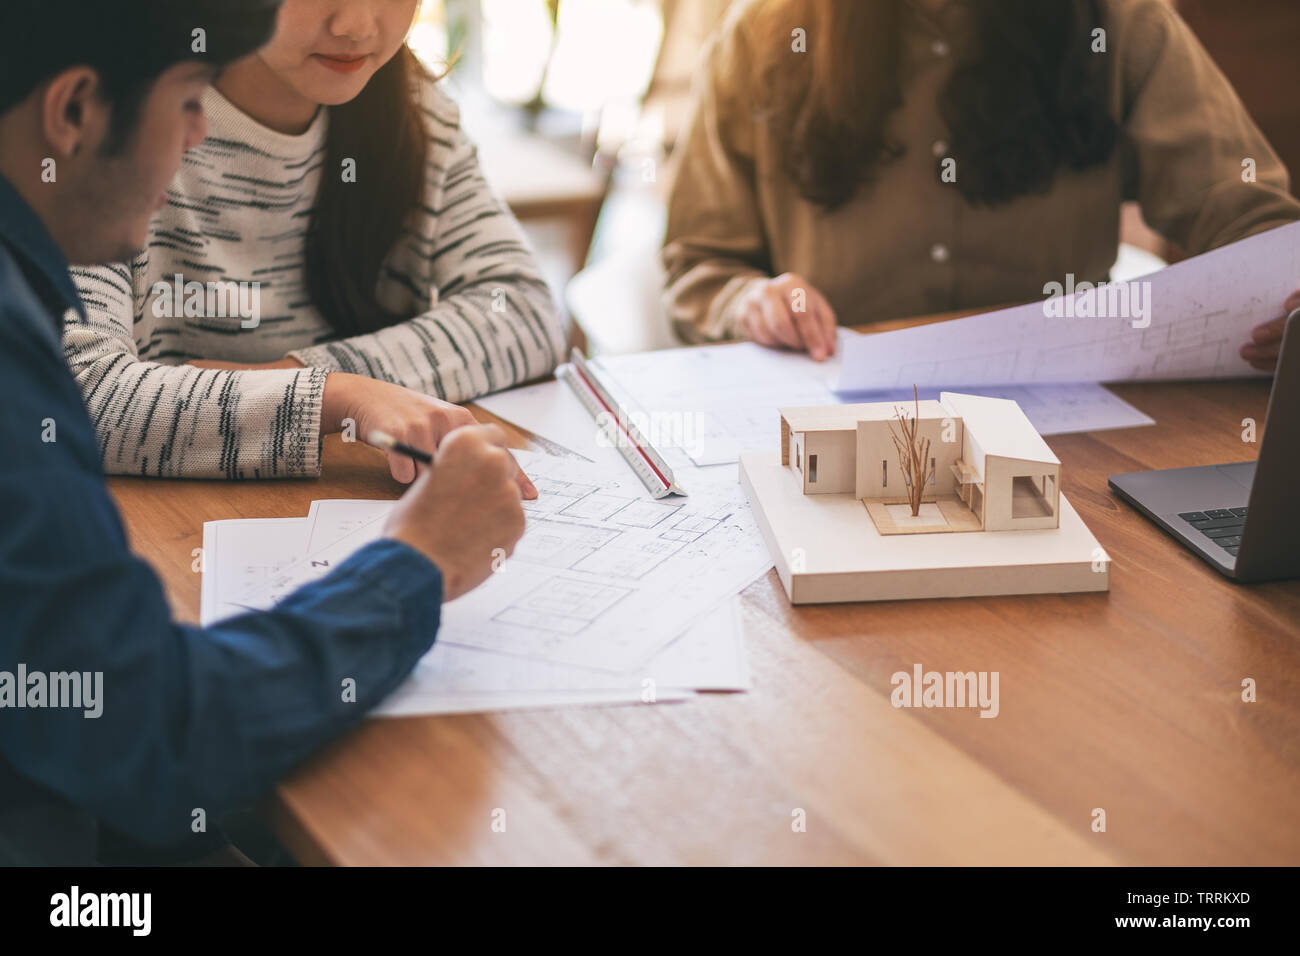 Group of an architect working and discussing about an architecture model together with shop drawing paper on table in office Stock Photo